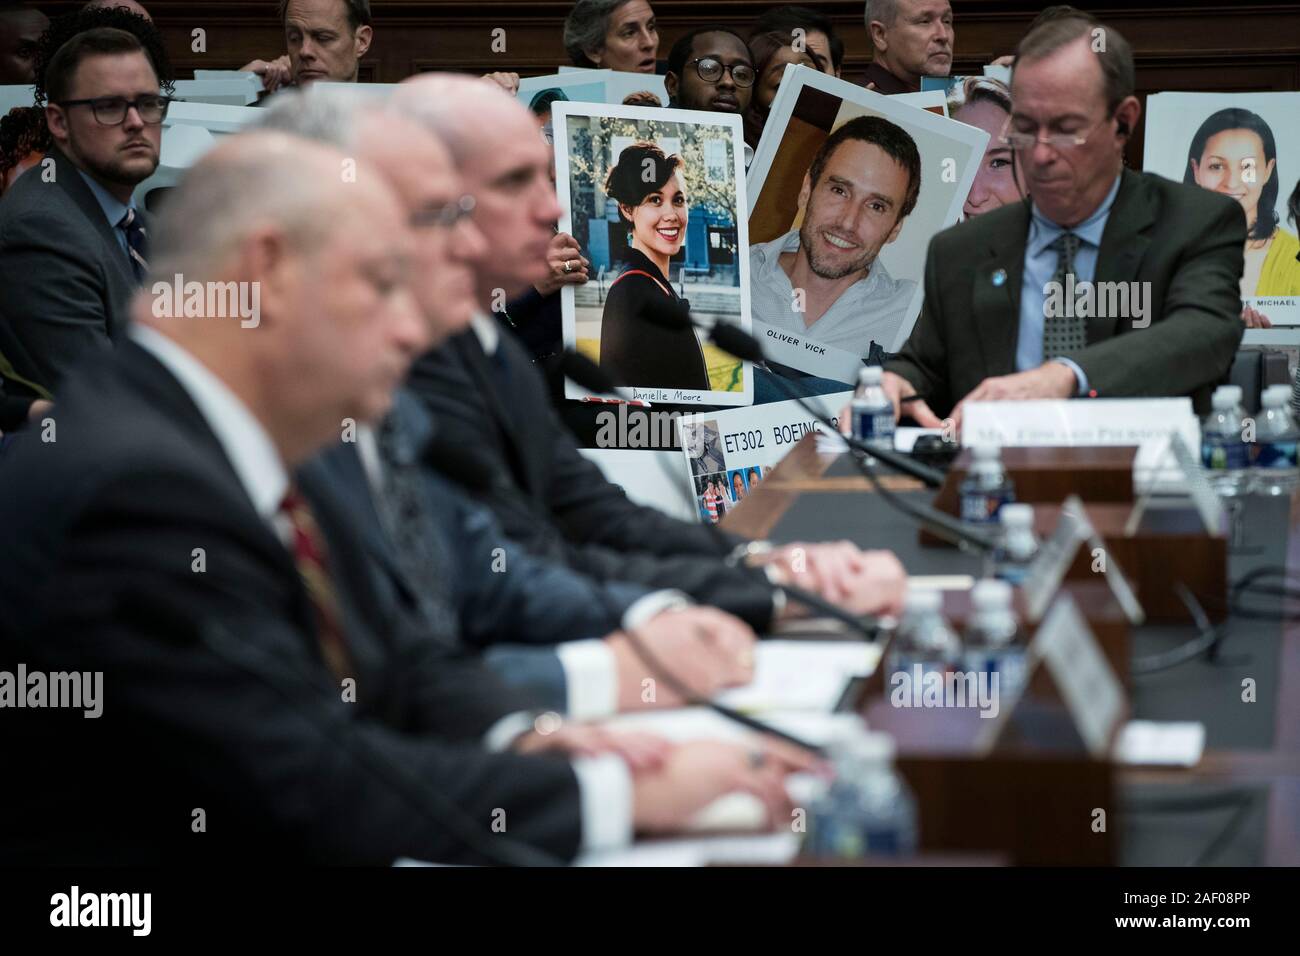 (191211) -- WASHINGTON, Dec. 11, 2019 (Xinhua) -- People hold photos of Boeing 737 plane crash victims as Stephen Dickson, chief of the Federal Aviation Administration (FAA), testifies before the House Committee on Transportation and Infrastructure during a hearing on 'The Boeing 737 MAX: Examining the Federal Aviation Administration's Oversight of the Aircraft's Certification' in Washington, DC, the United States, on Dec. 11, 2019. Steve Dickson said Wednesday that aviation regulators won't likely clear Boeing's troubled 737 Max airplanes for flight until 2020. (Photo by Sarah Silbiger/Xinhu Stock Photo